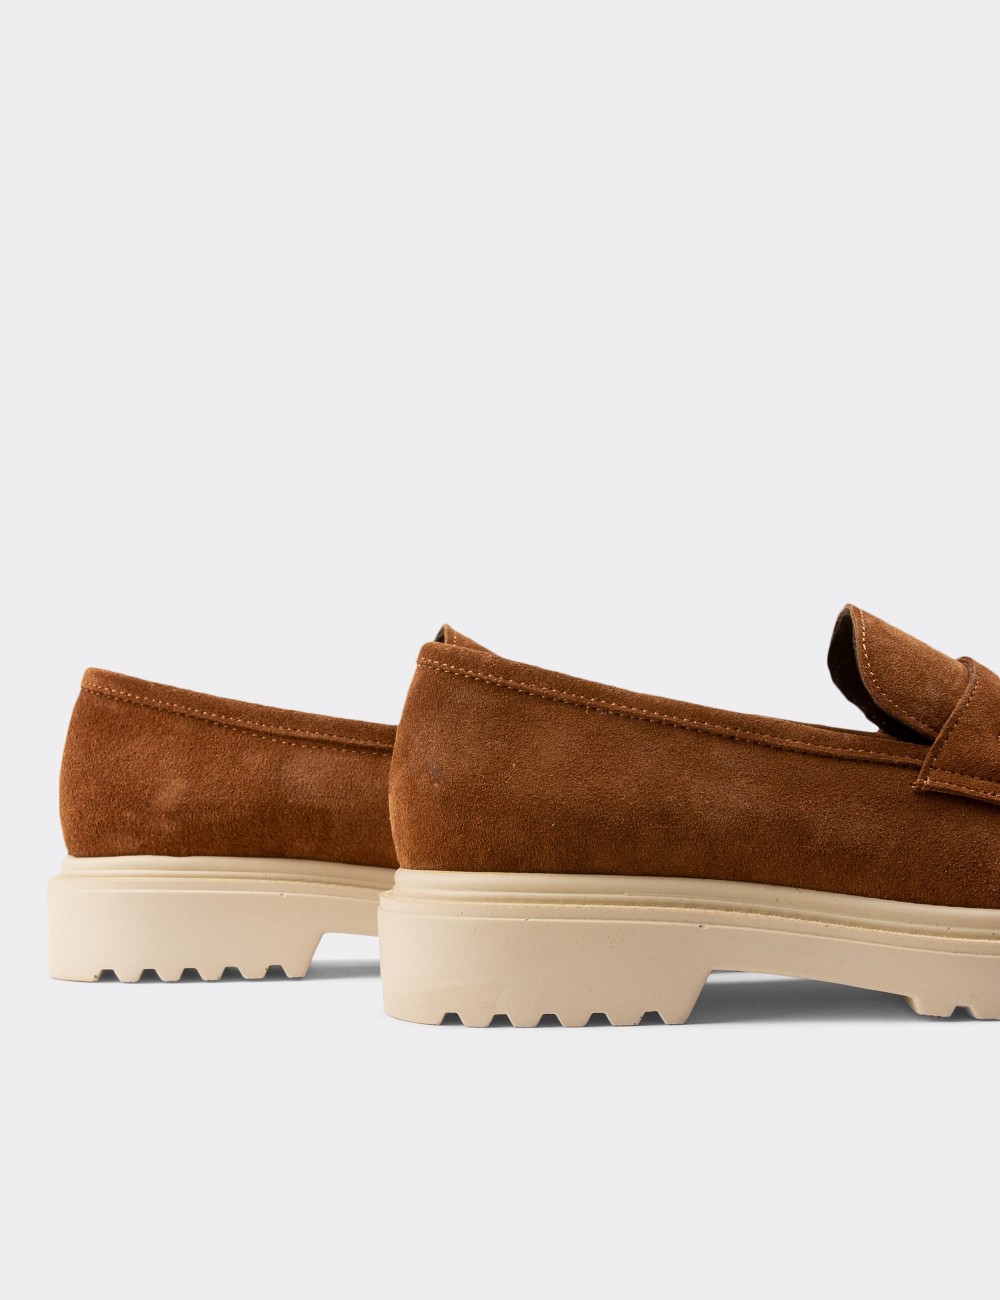 Tan Suede Leather Loafers - 01903ZTBAP01